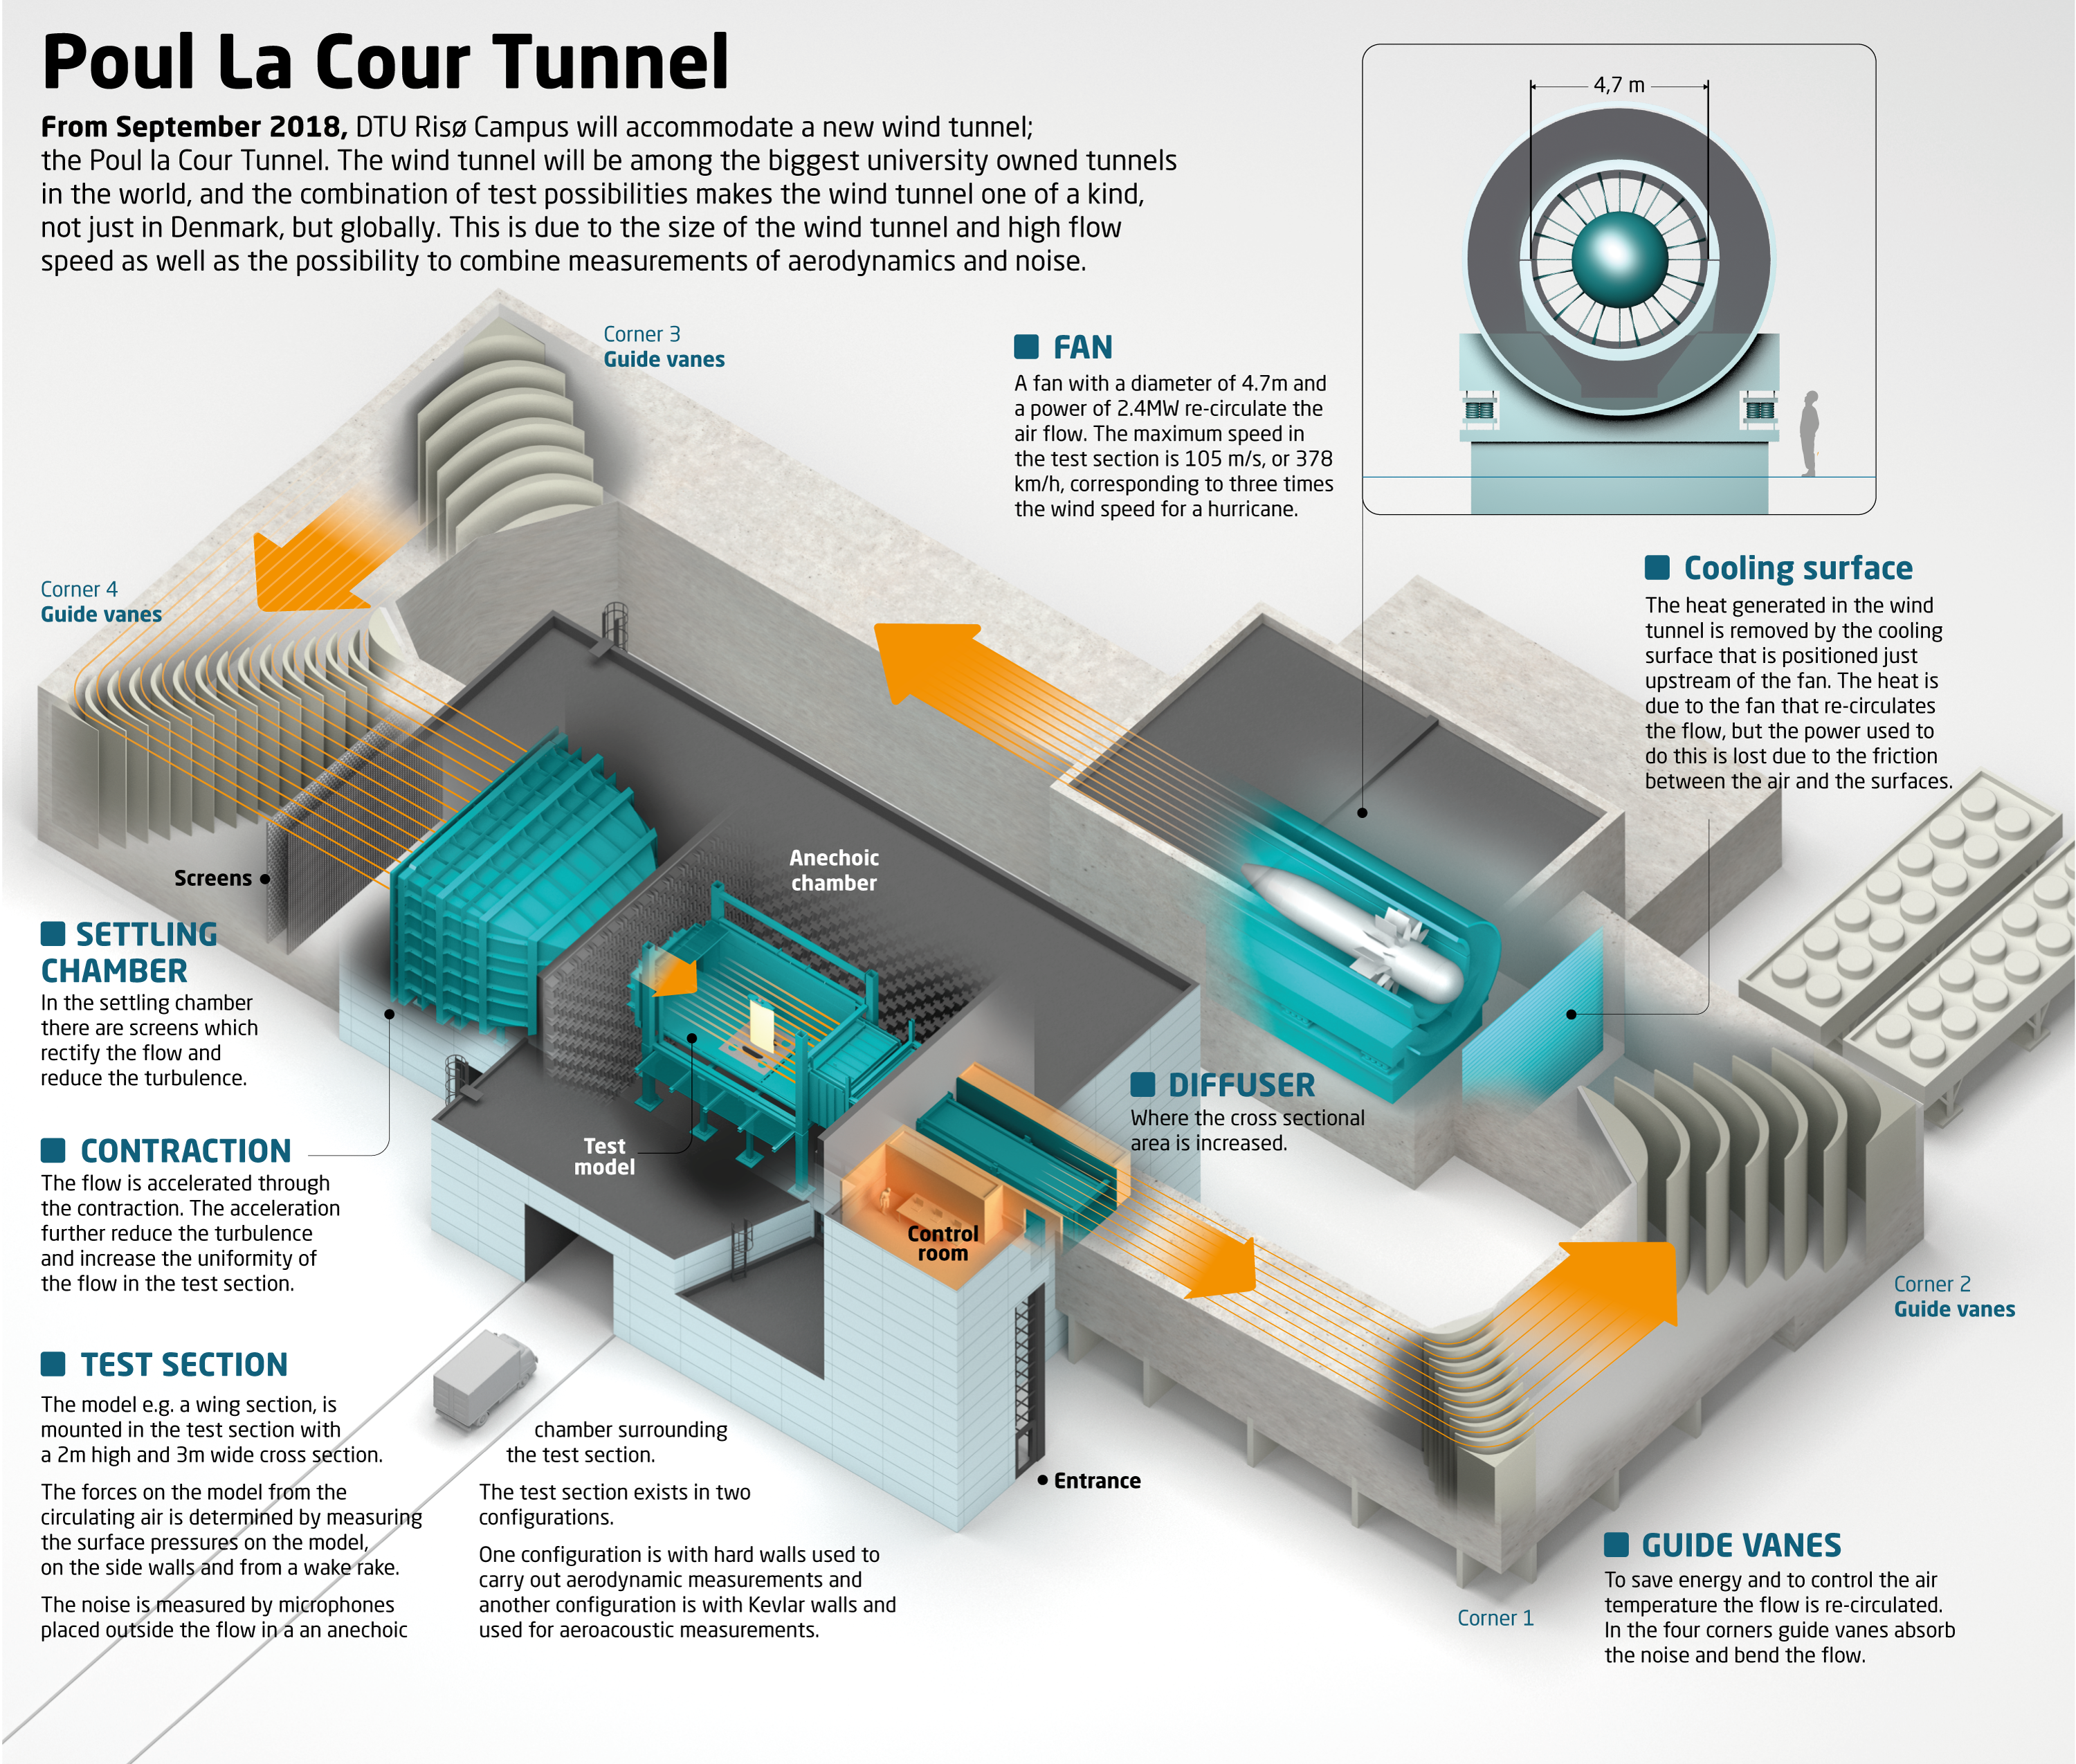 Graphics showing the inside of the tunnel